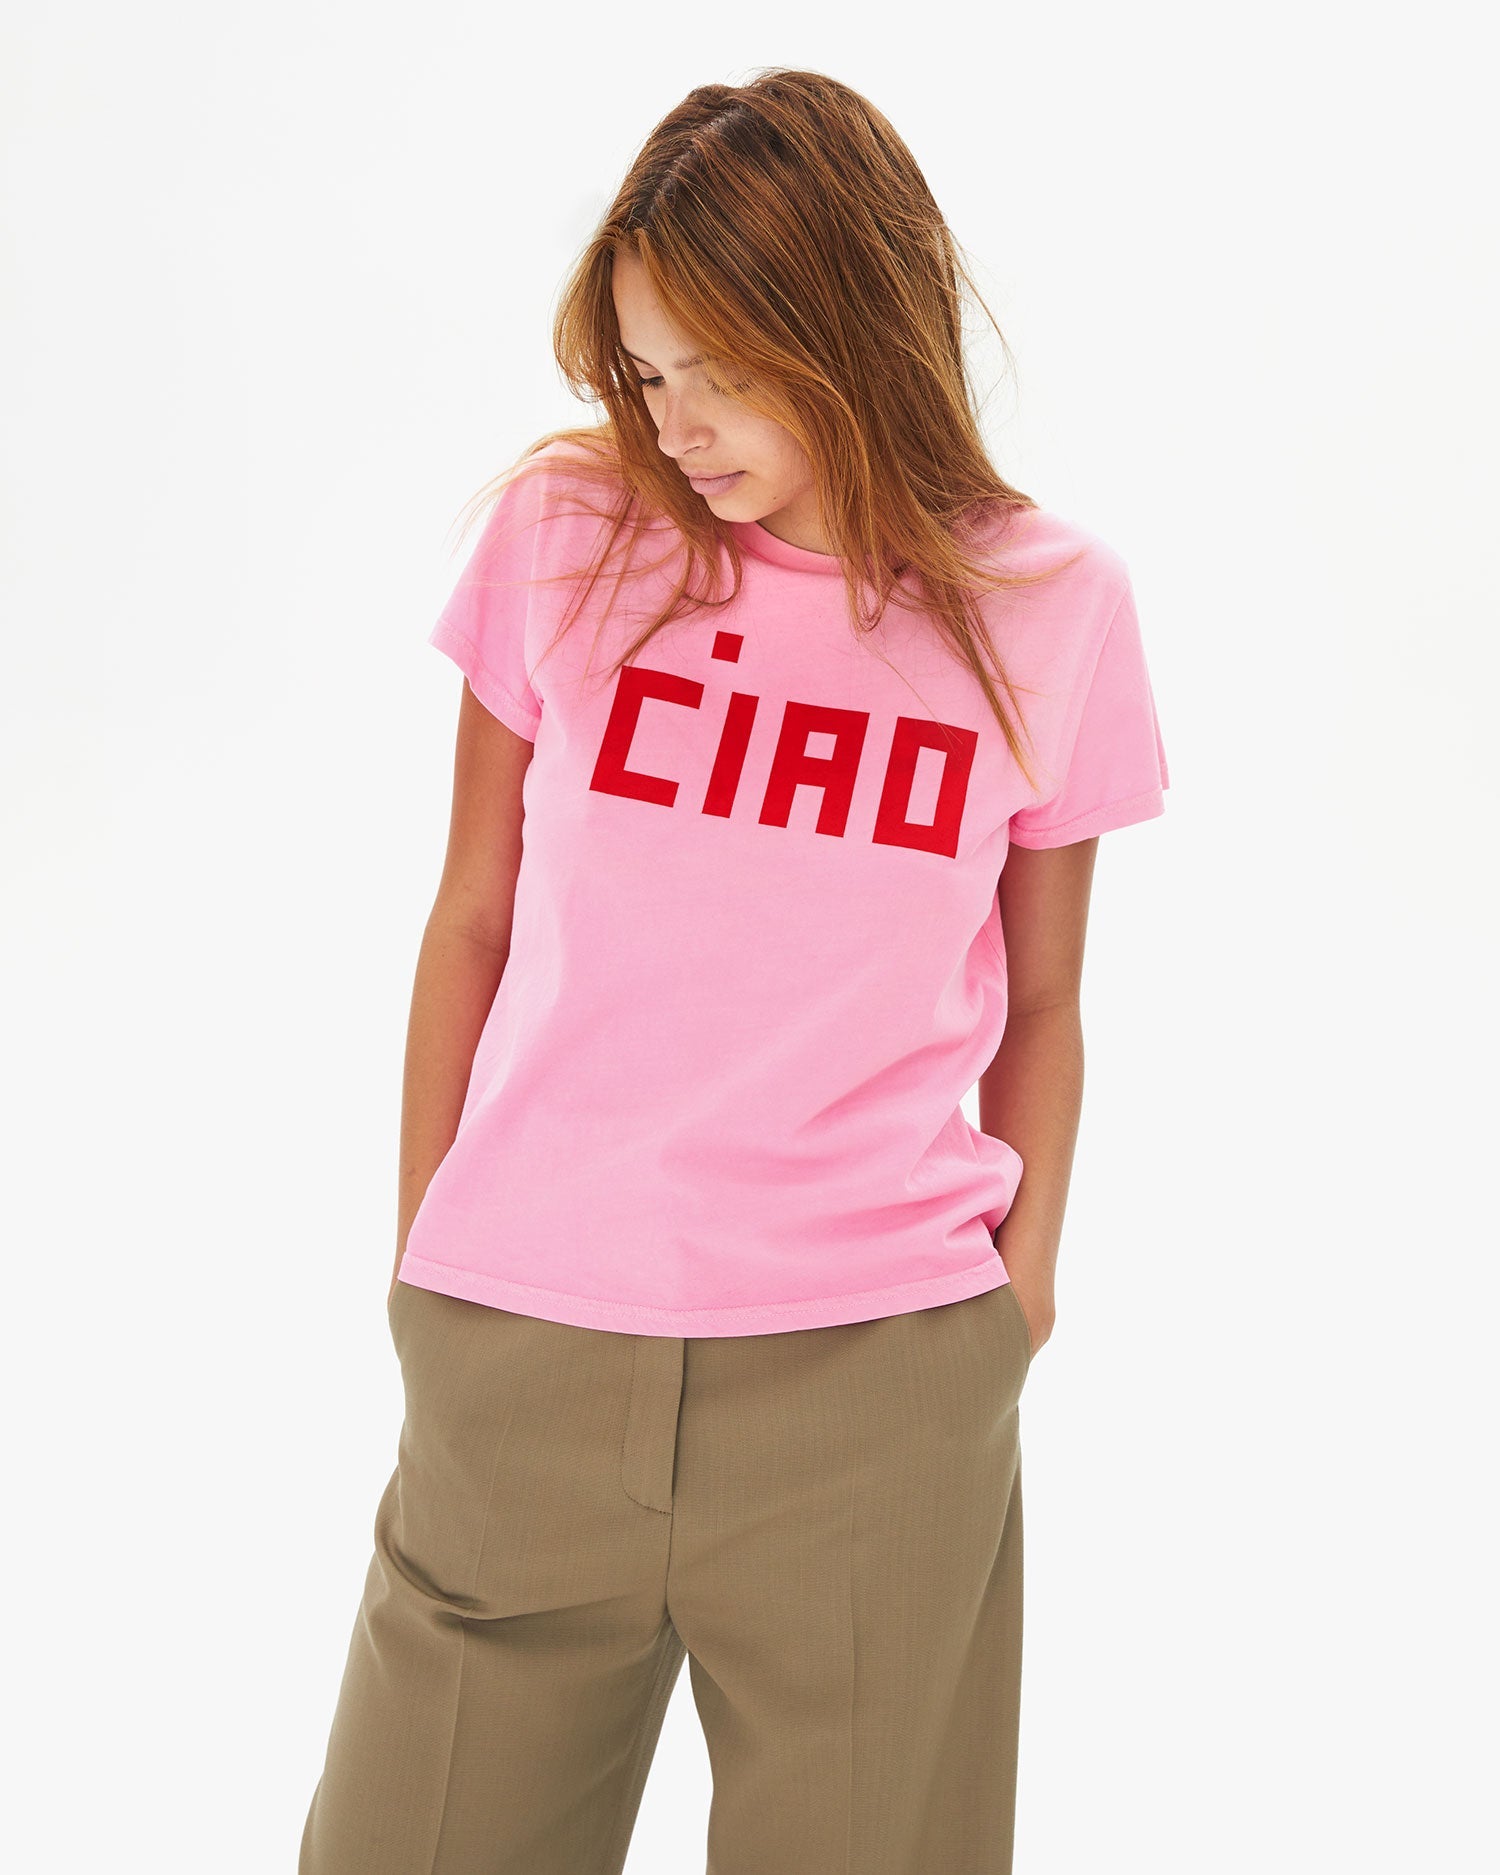 Classic Tee in Neon Pink Ciao